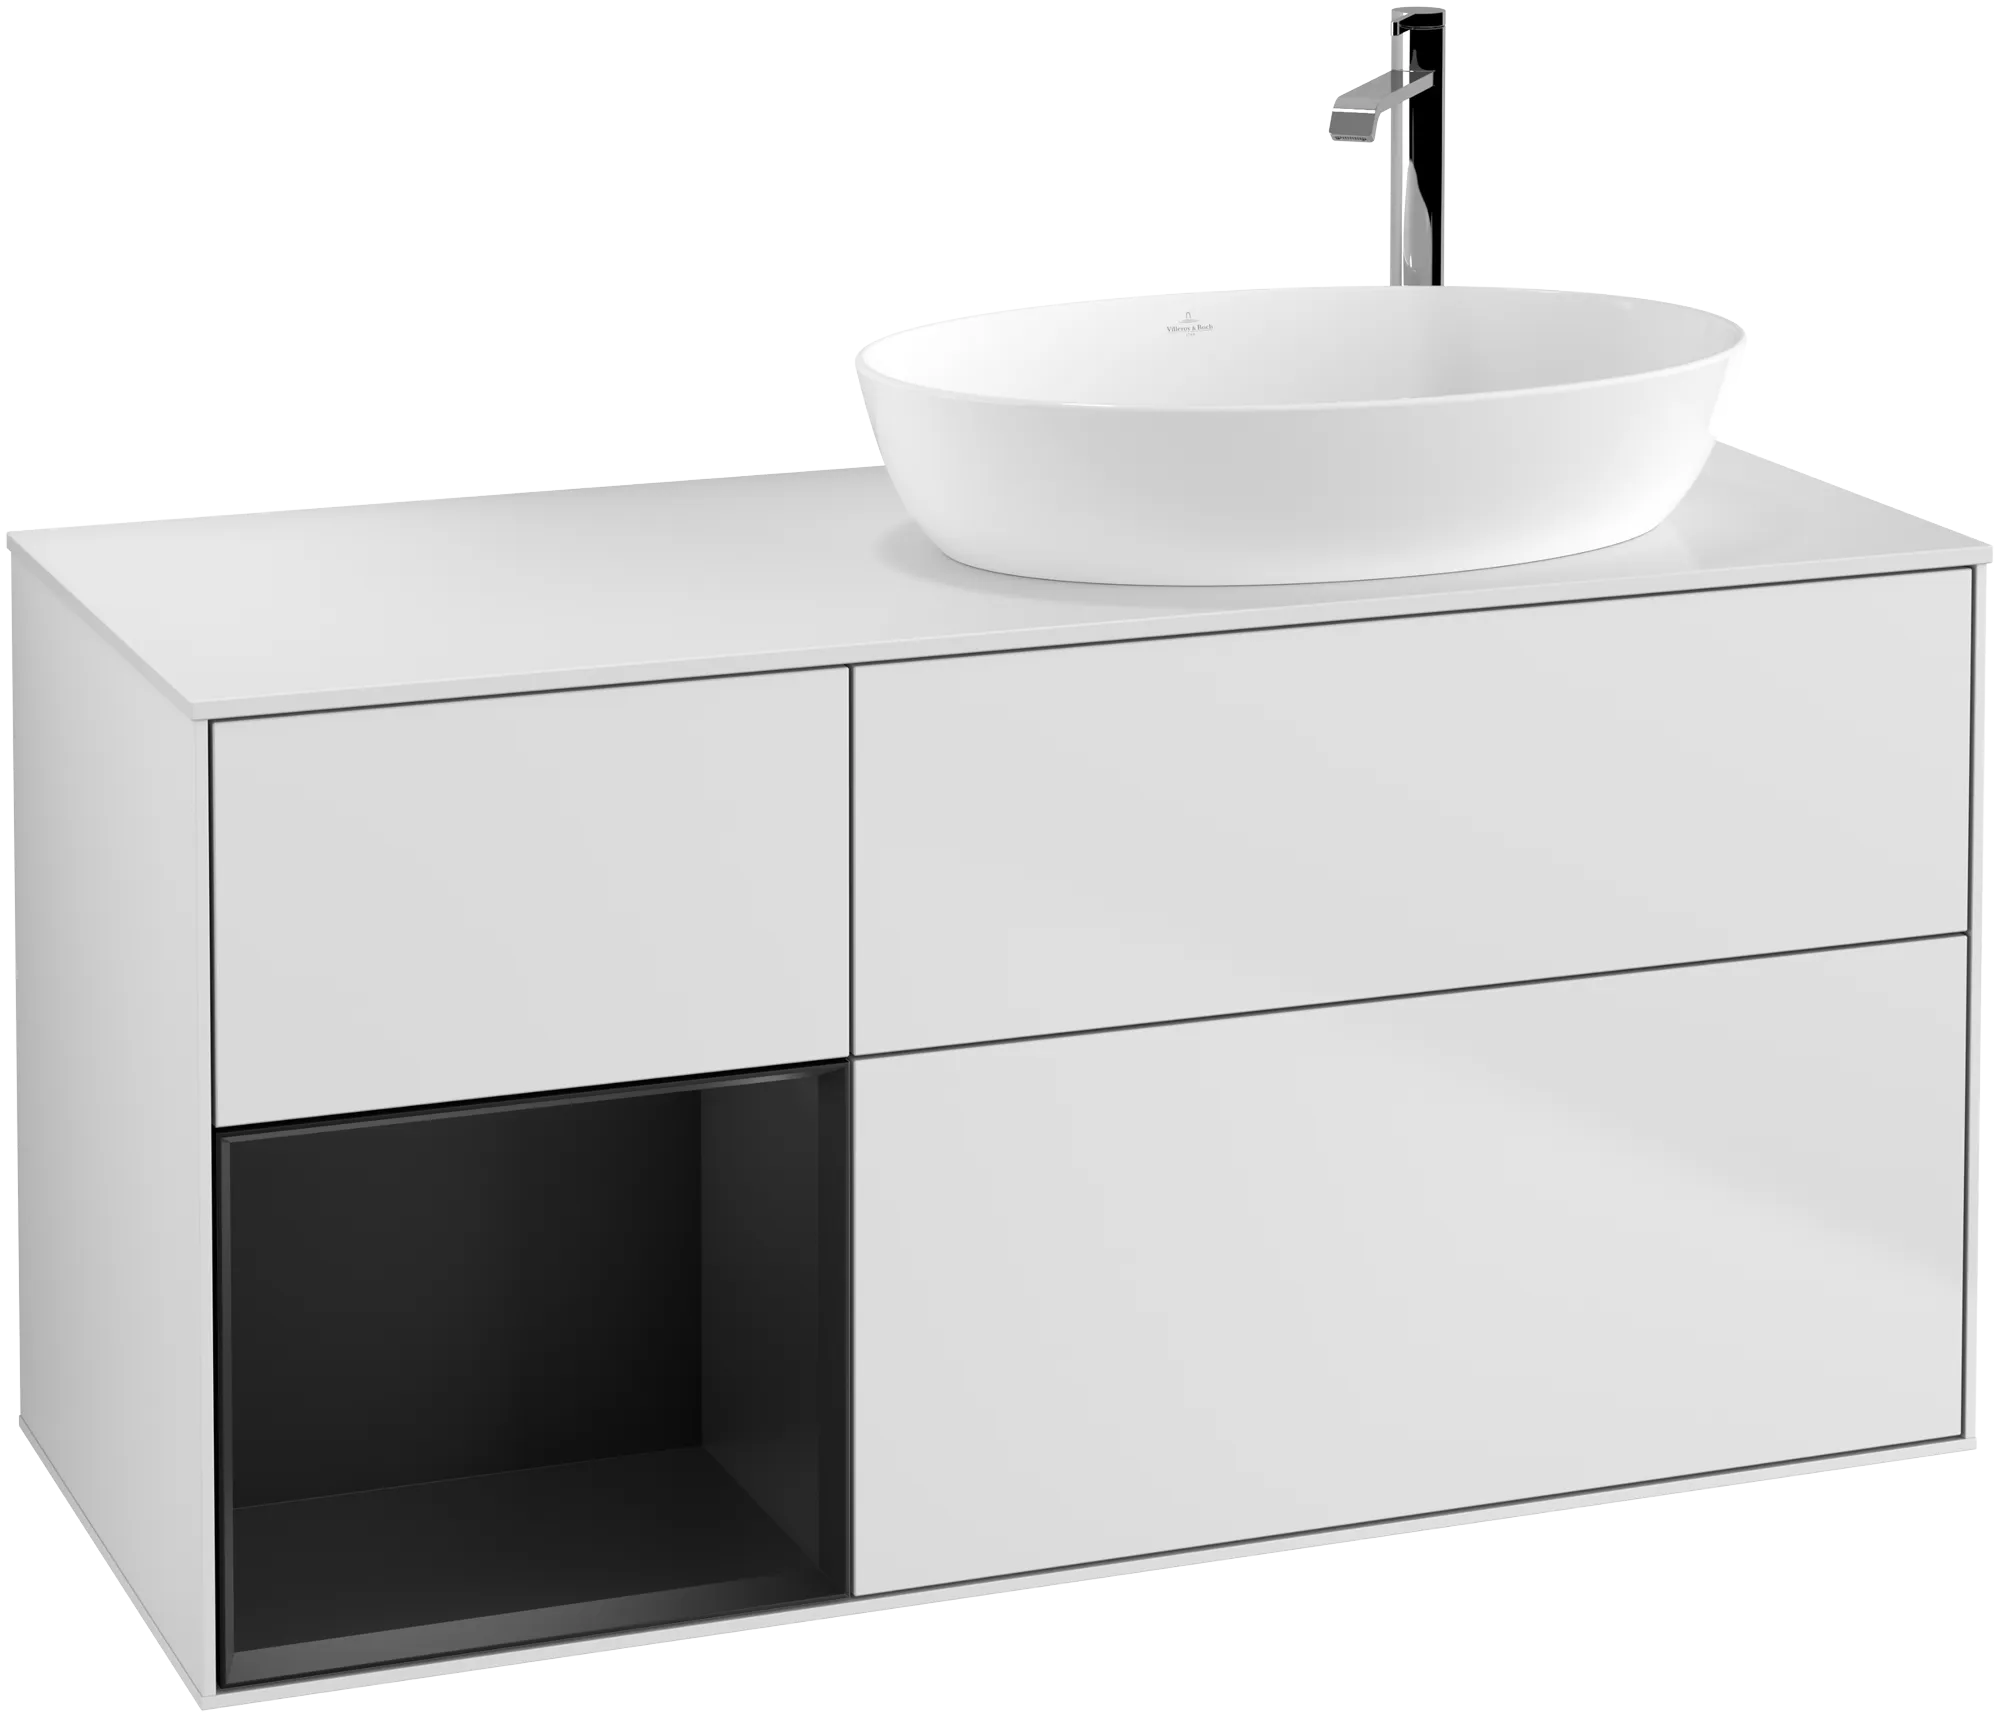 Obrázek VILLEROY BOCH Finion Vanity unit, with lighting, 3 pull-out compartments, 1200 x 603 x 501 mm, White Matt Lacquer / Black Matt Lacquer / Glass White Matt #G921PDMT